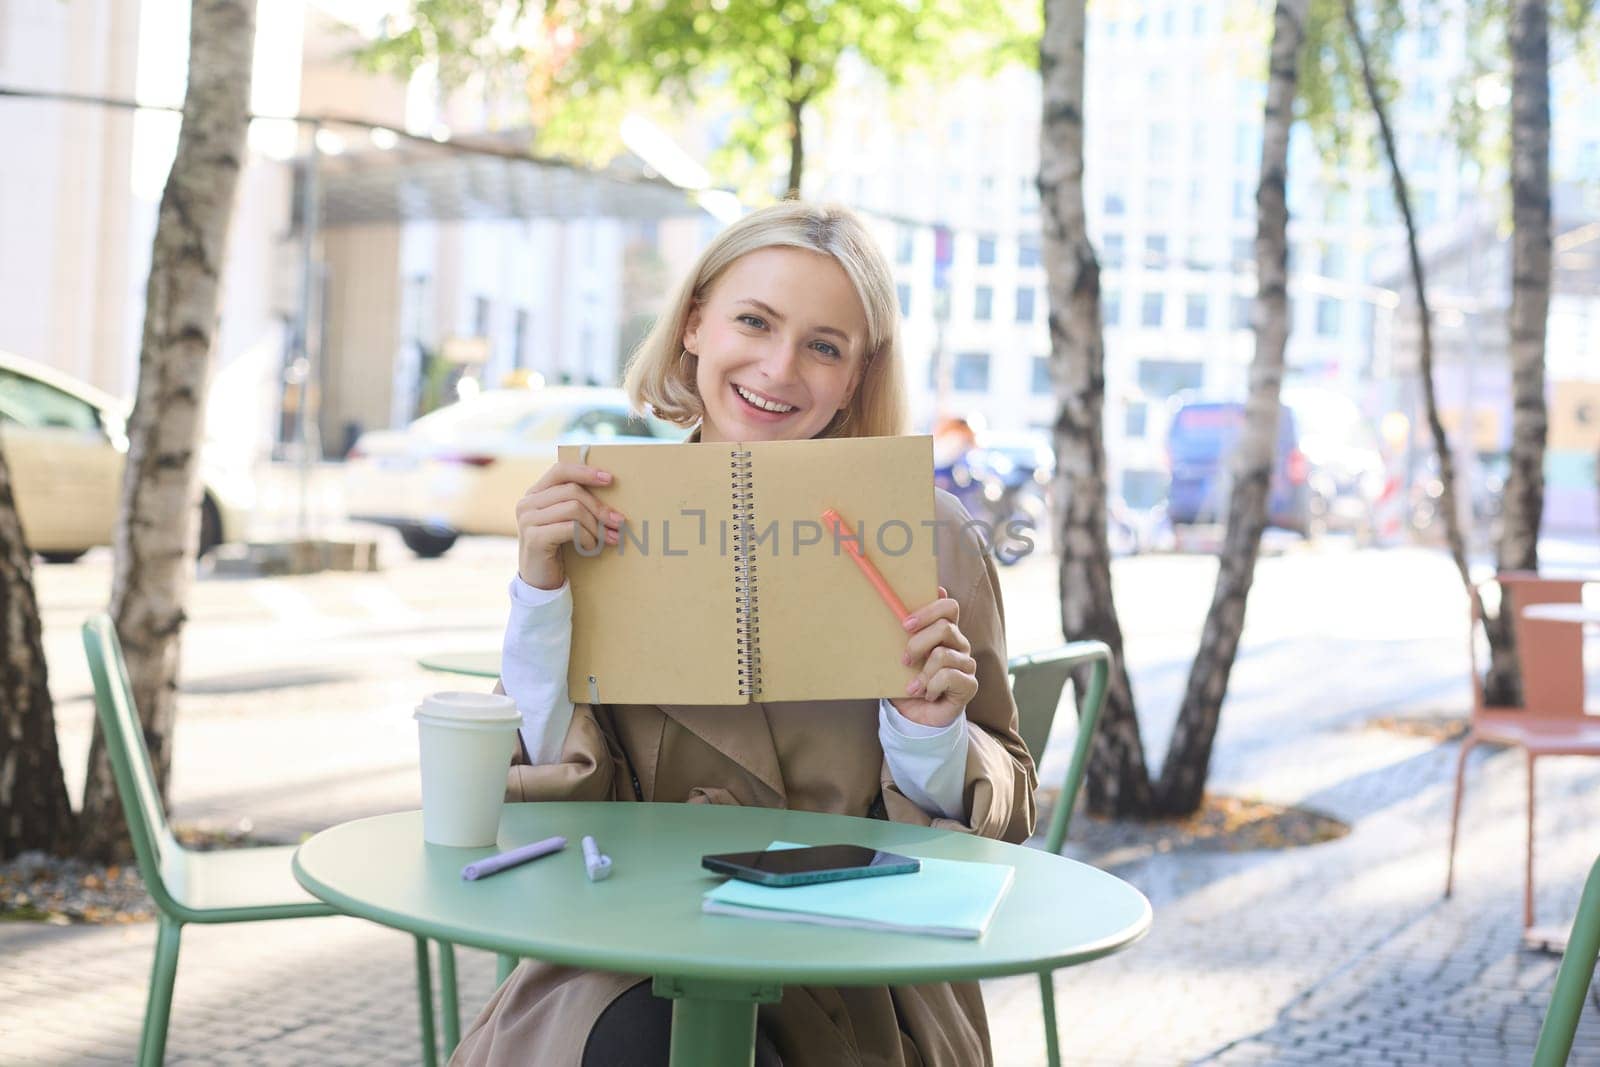 Portrait of carefree, smiling young woman with notebook and pen, sitting in outdoor cafe near table, writing in journal, making plans in her planner.